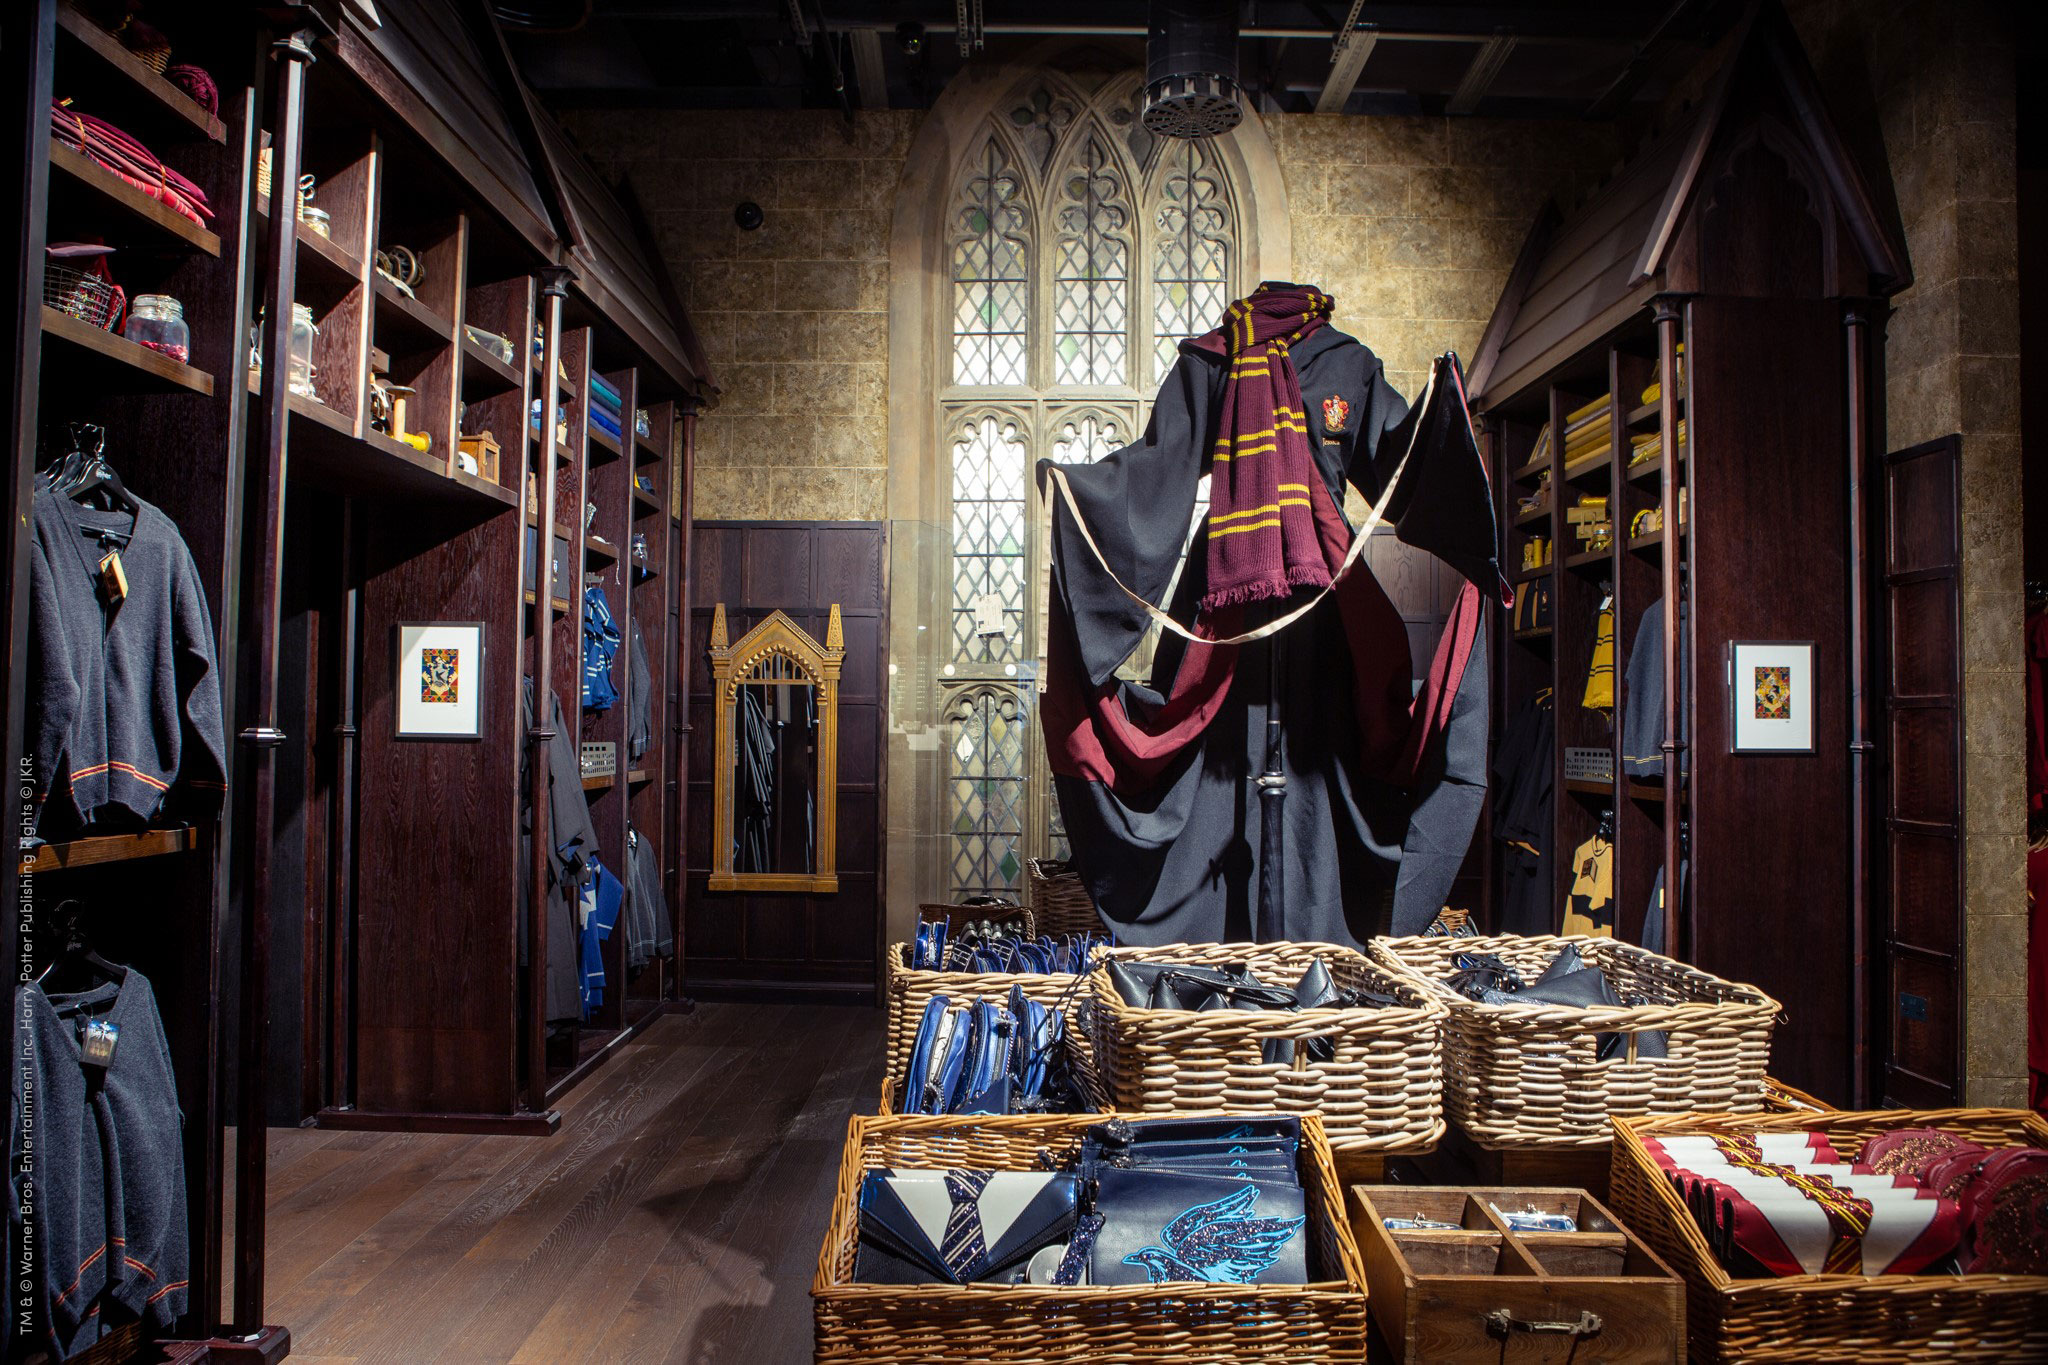 Members will have access to discounts at the Warner Bros. Studio Tour’s gift shop.